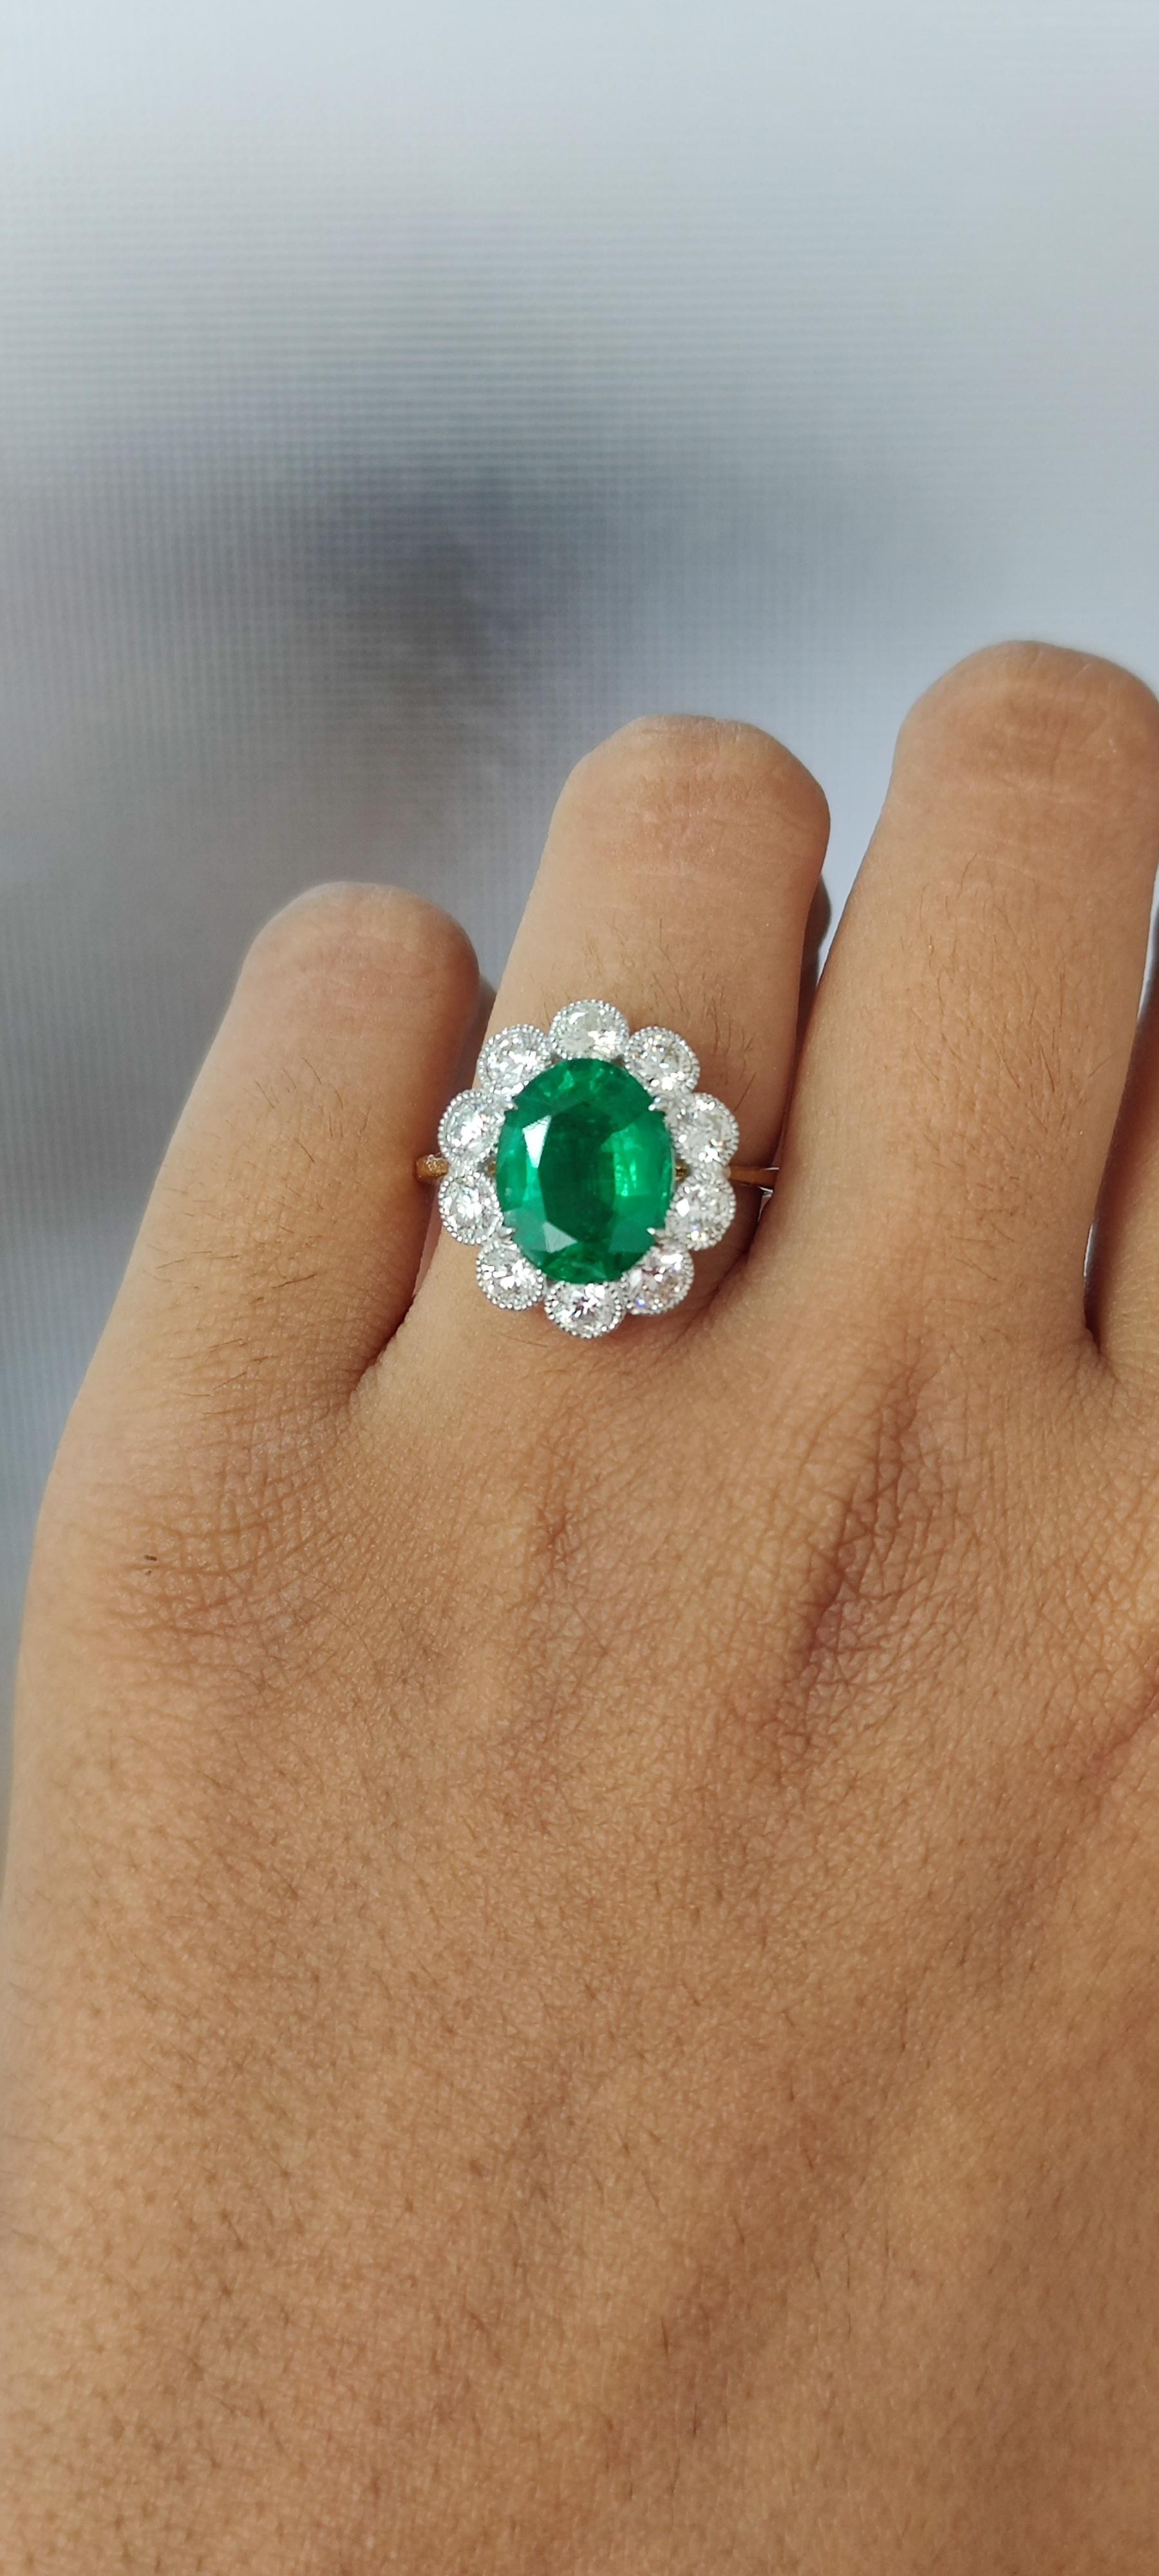 Presenting a masterpiece of a ring that perfectly combines the vivid green elegance of a meticulously cut Emerald with the brilliance of sparkling round Diamonds.

Originating from the enchanting mines of Ethiopia, the 2.88 Carat Emerald boasts a